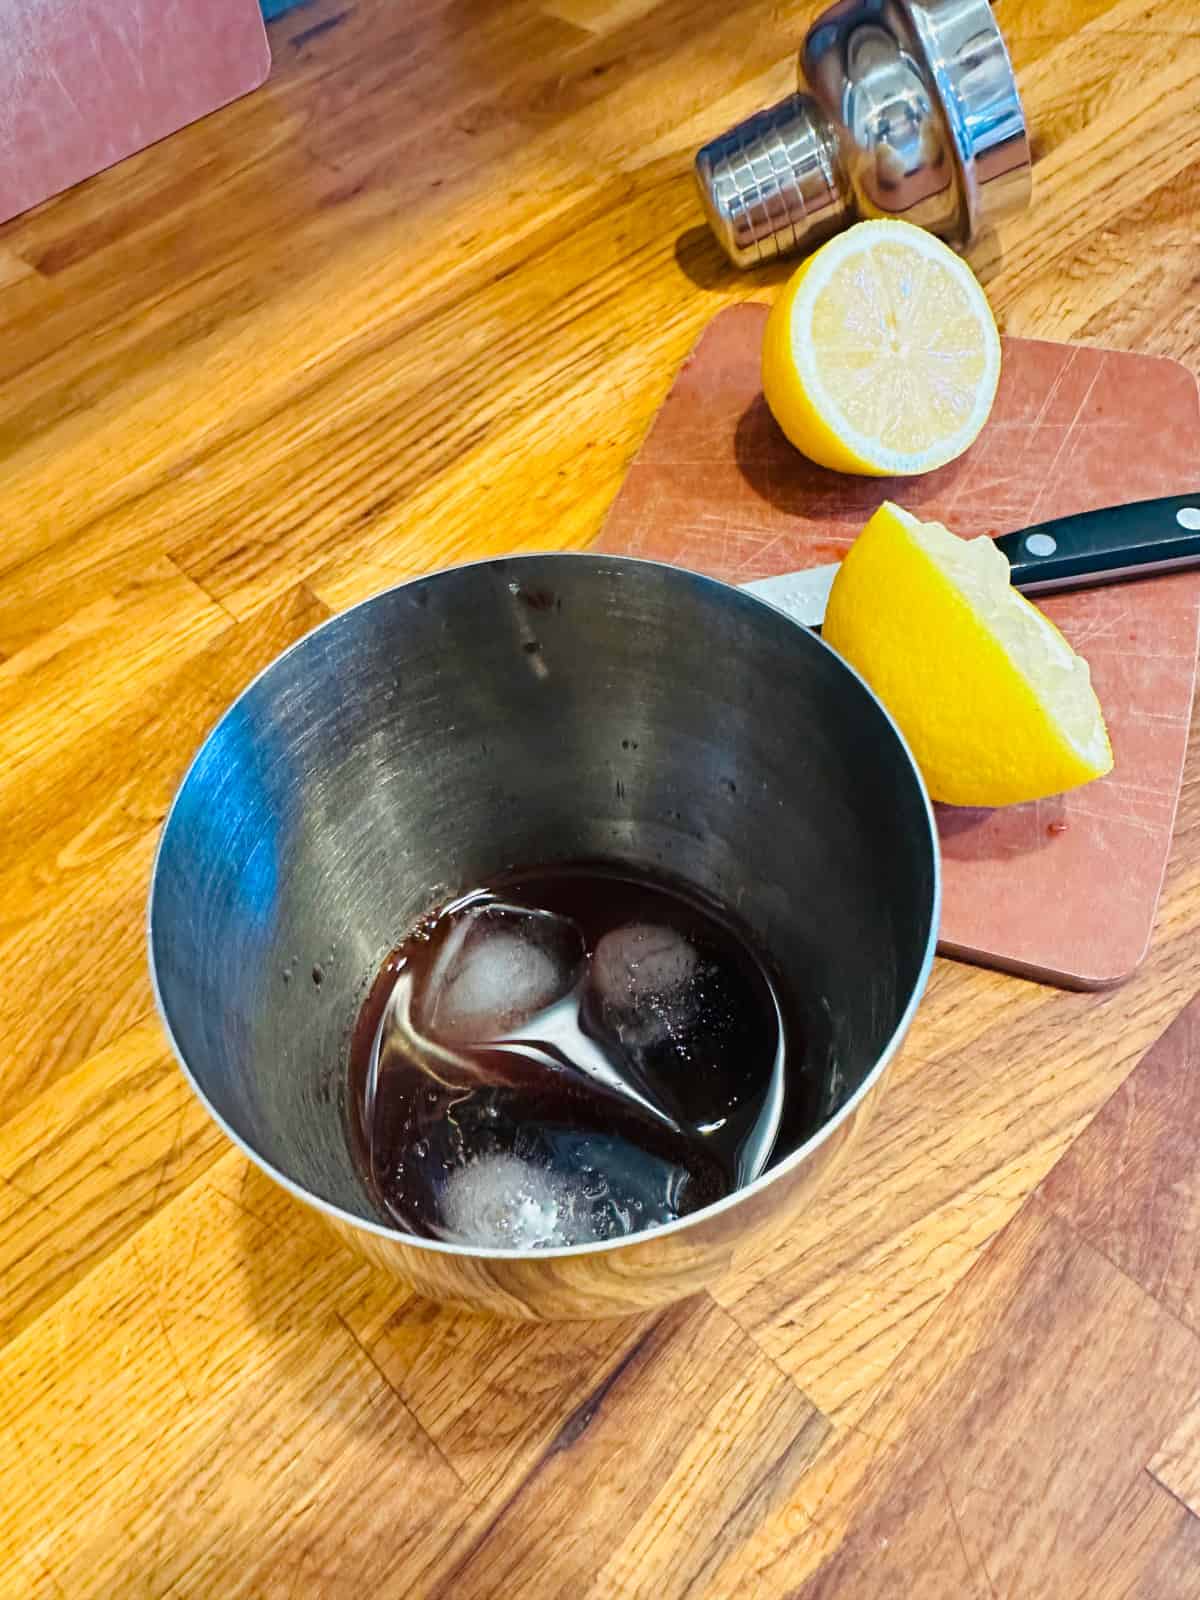 Metal cocktail shaker with ice and dark red liquid next to lemon cut in half.